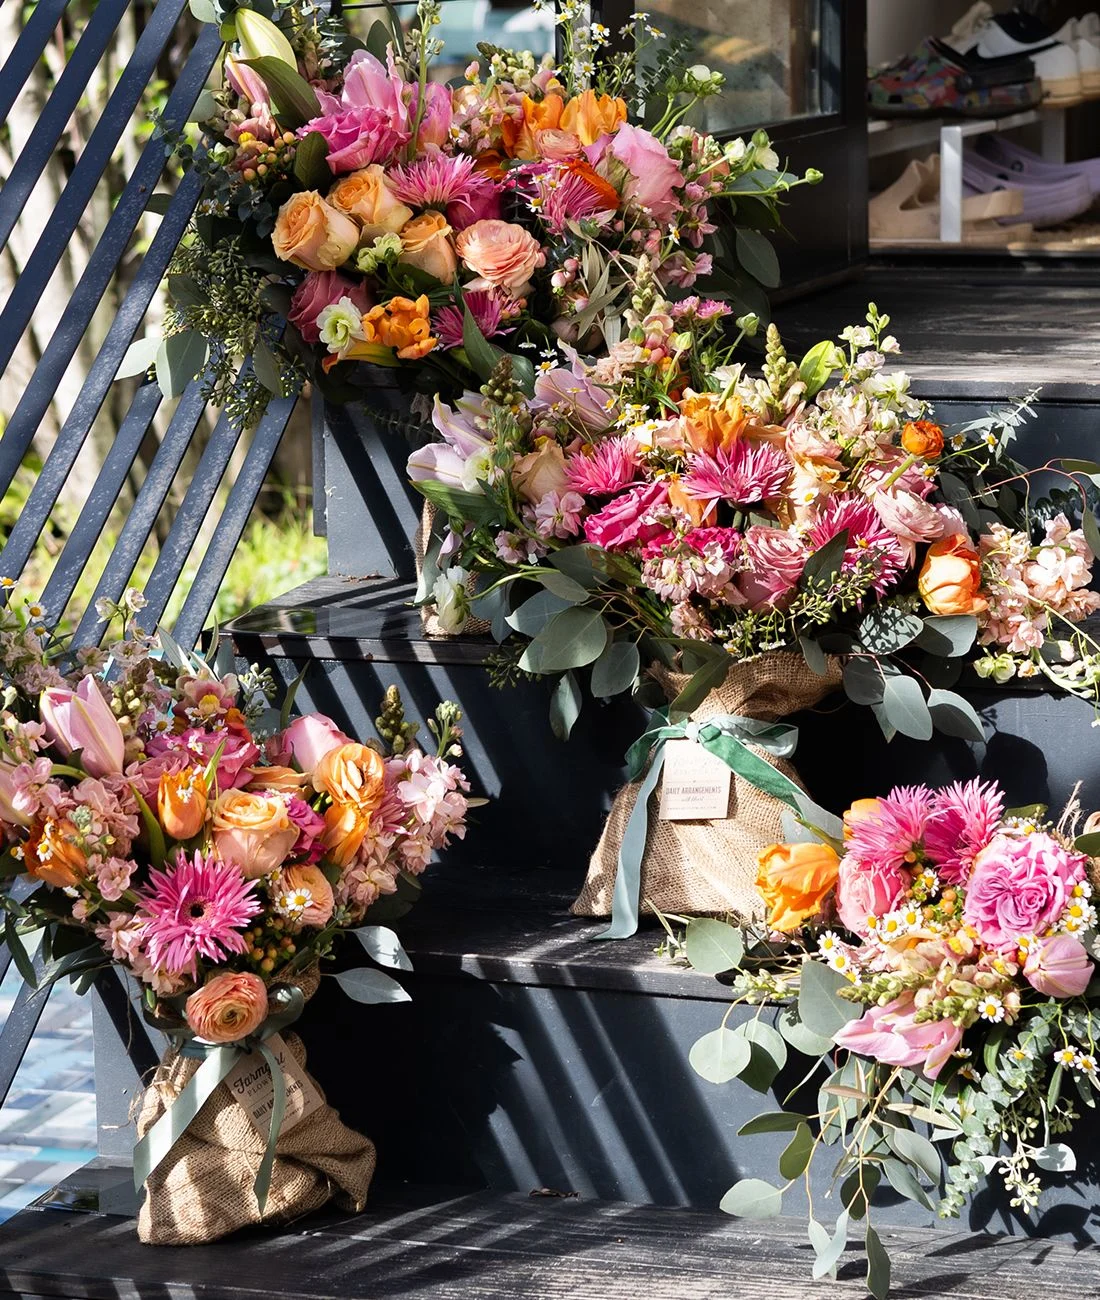 Eeny Meeny Miny Moe – How the heck to pick from all the beautiful Farmgirl bouquets?!